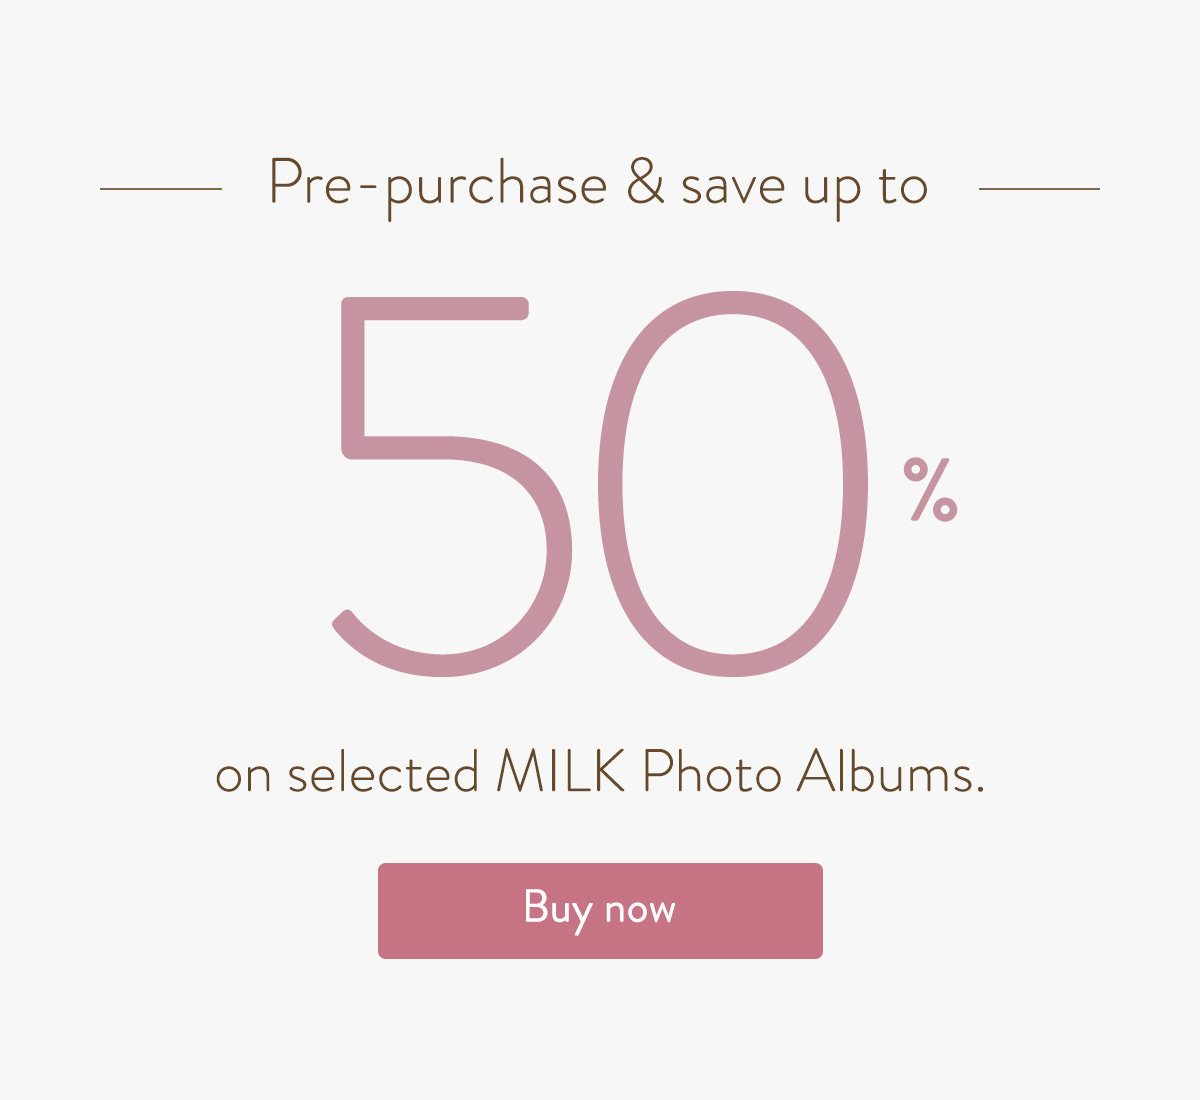 Pre-purchase & save up to 50% on selected MILK Photo Albums.